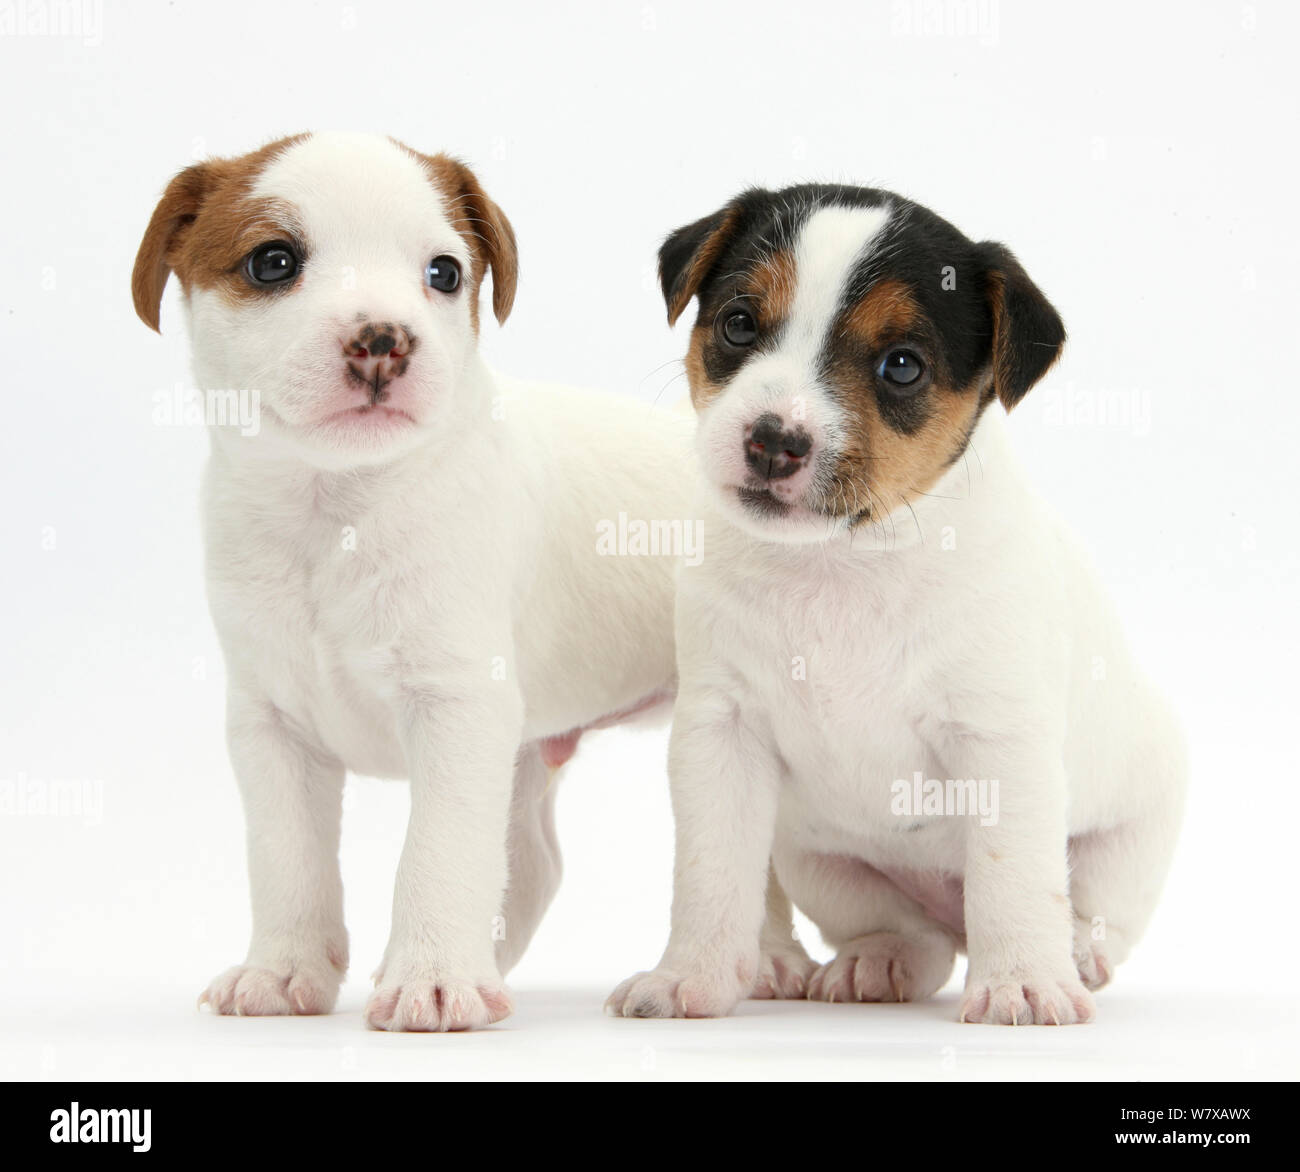 at what age is a jack russell terrier full grown